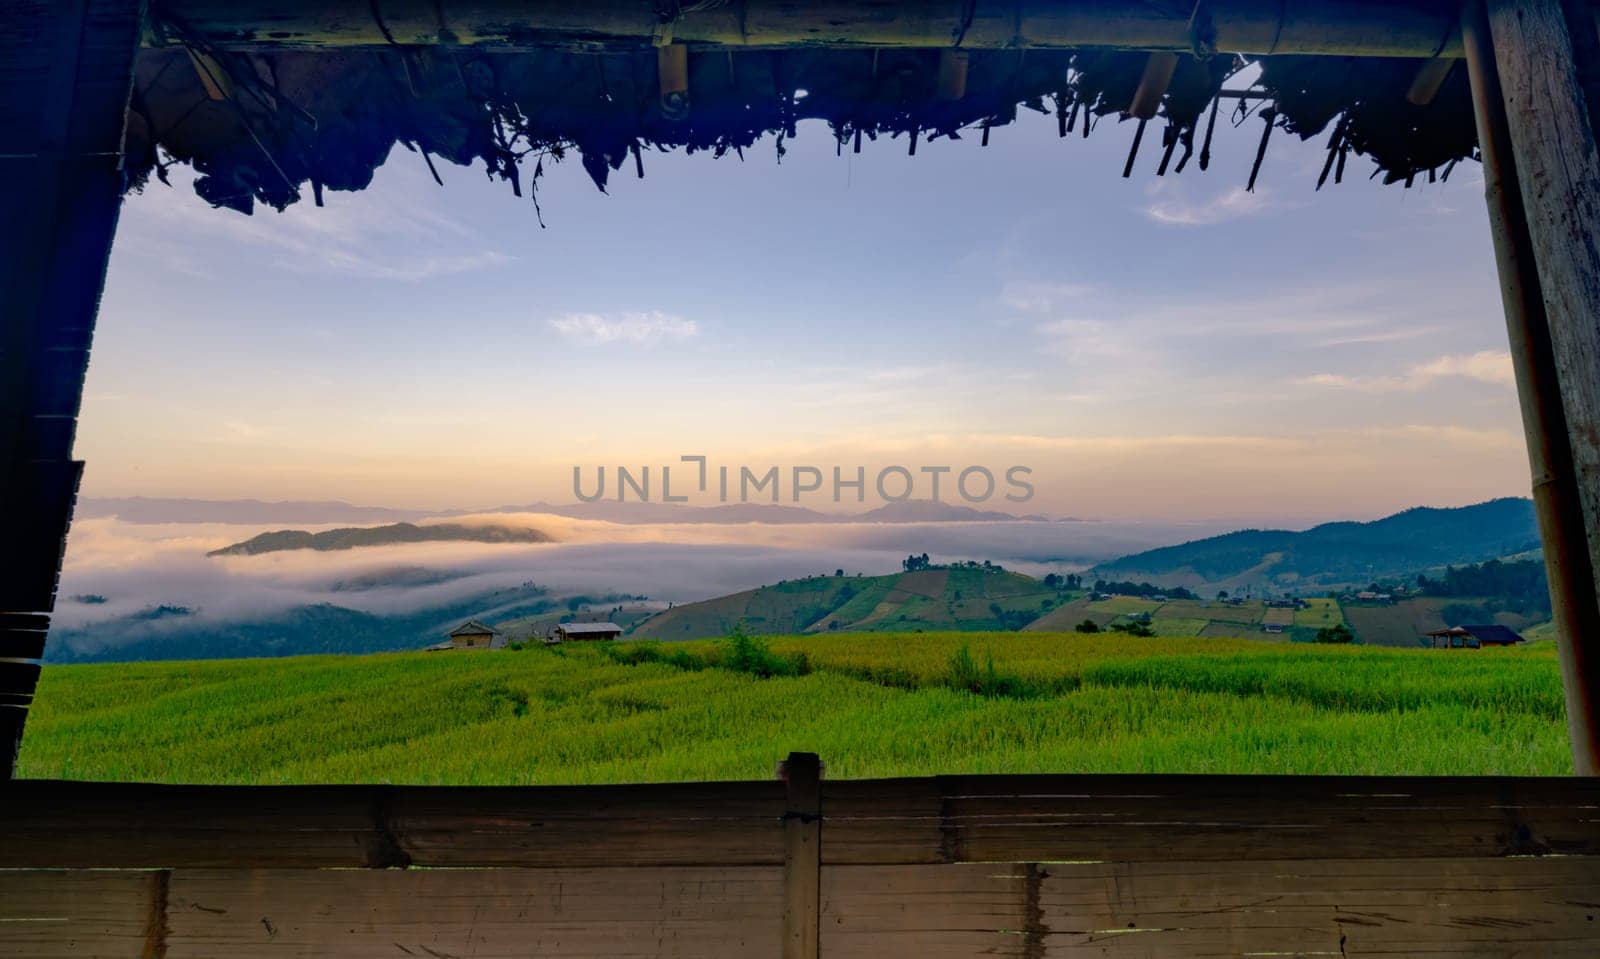 A view of a field with a foggy sky and mountains in the background. The sky is a mix of blue and orange hues, creating a serene and peaceful atmosphere. Rice terrace farm field and mountains. by Fahroni